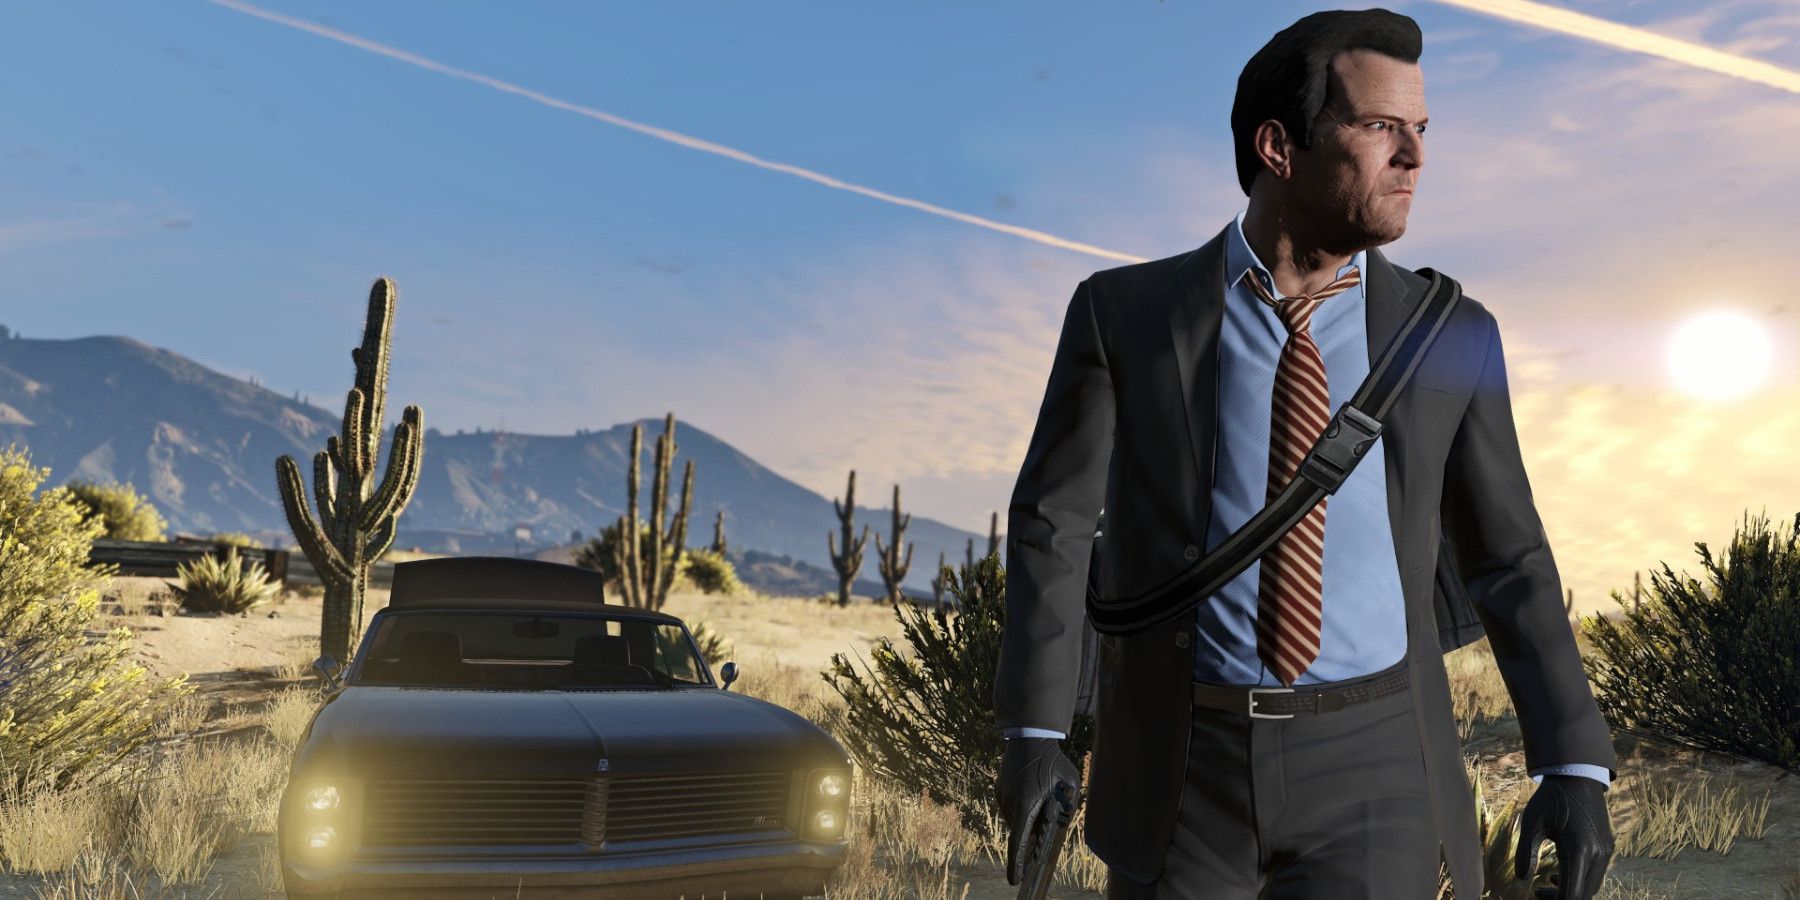 grand-theft-auto-5-michael-standing-in-front-of-car